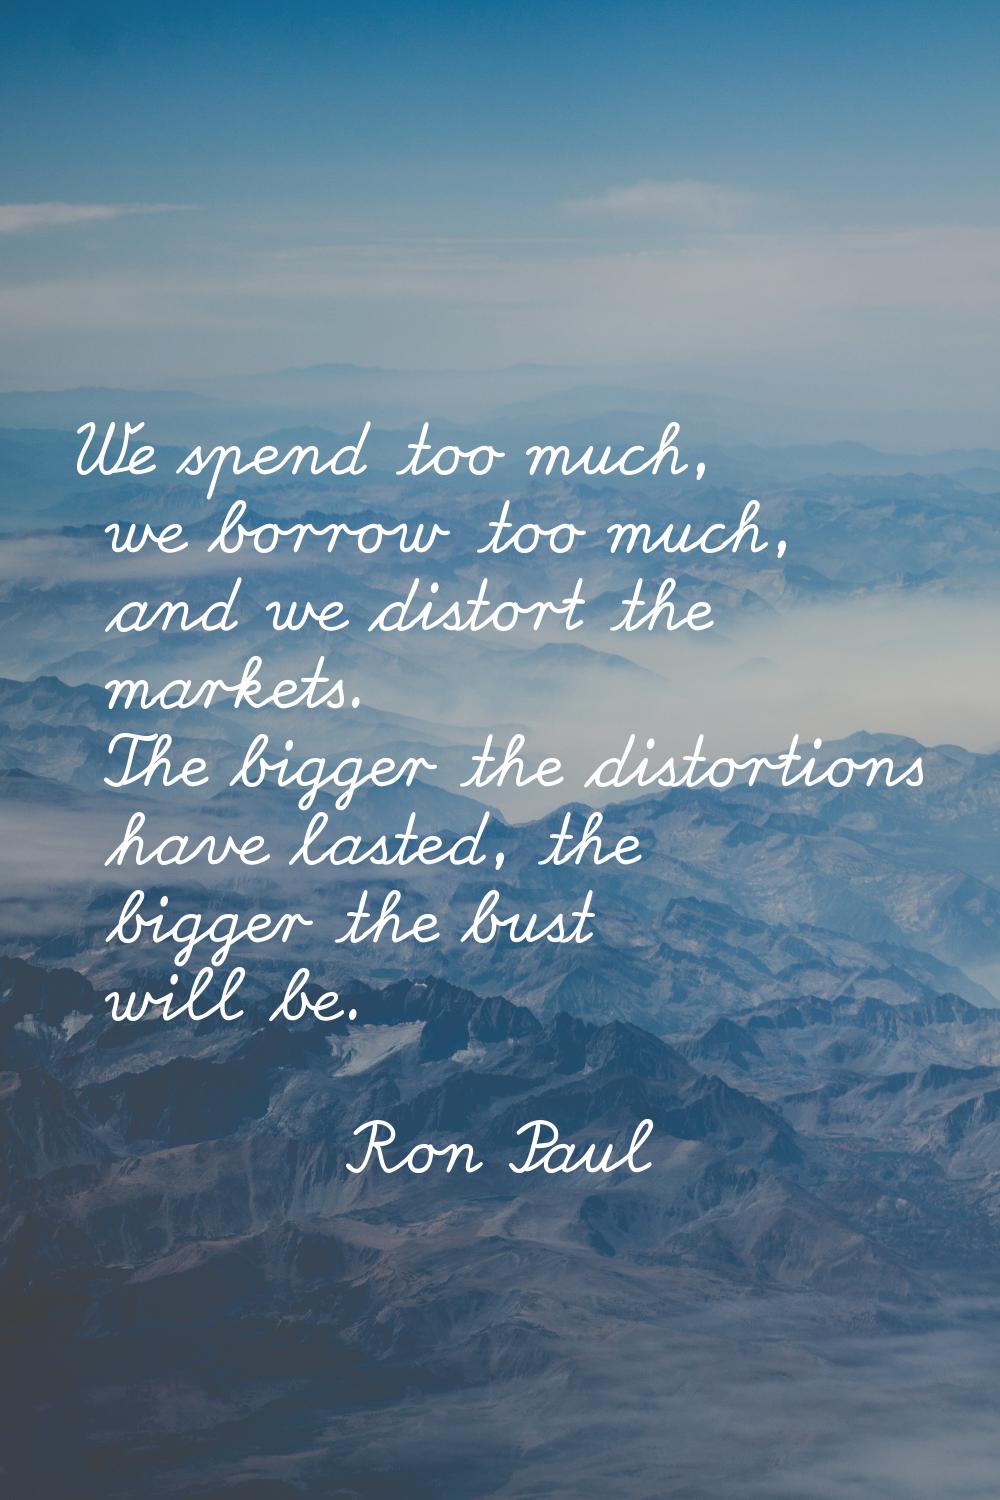 We spend too much, we borrow too much, and we distort the markets. The bigger the distortions have 